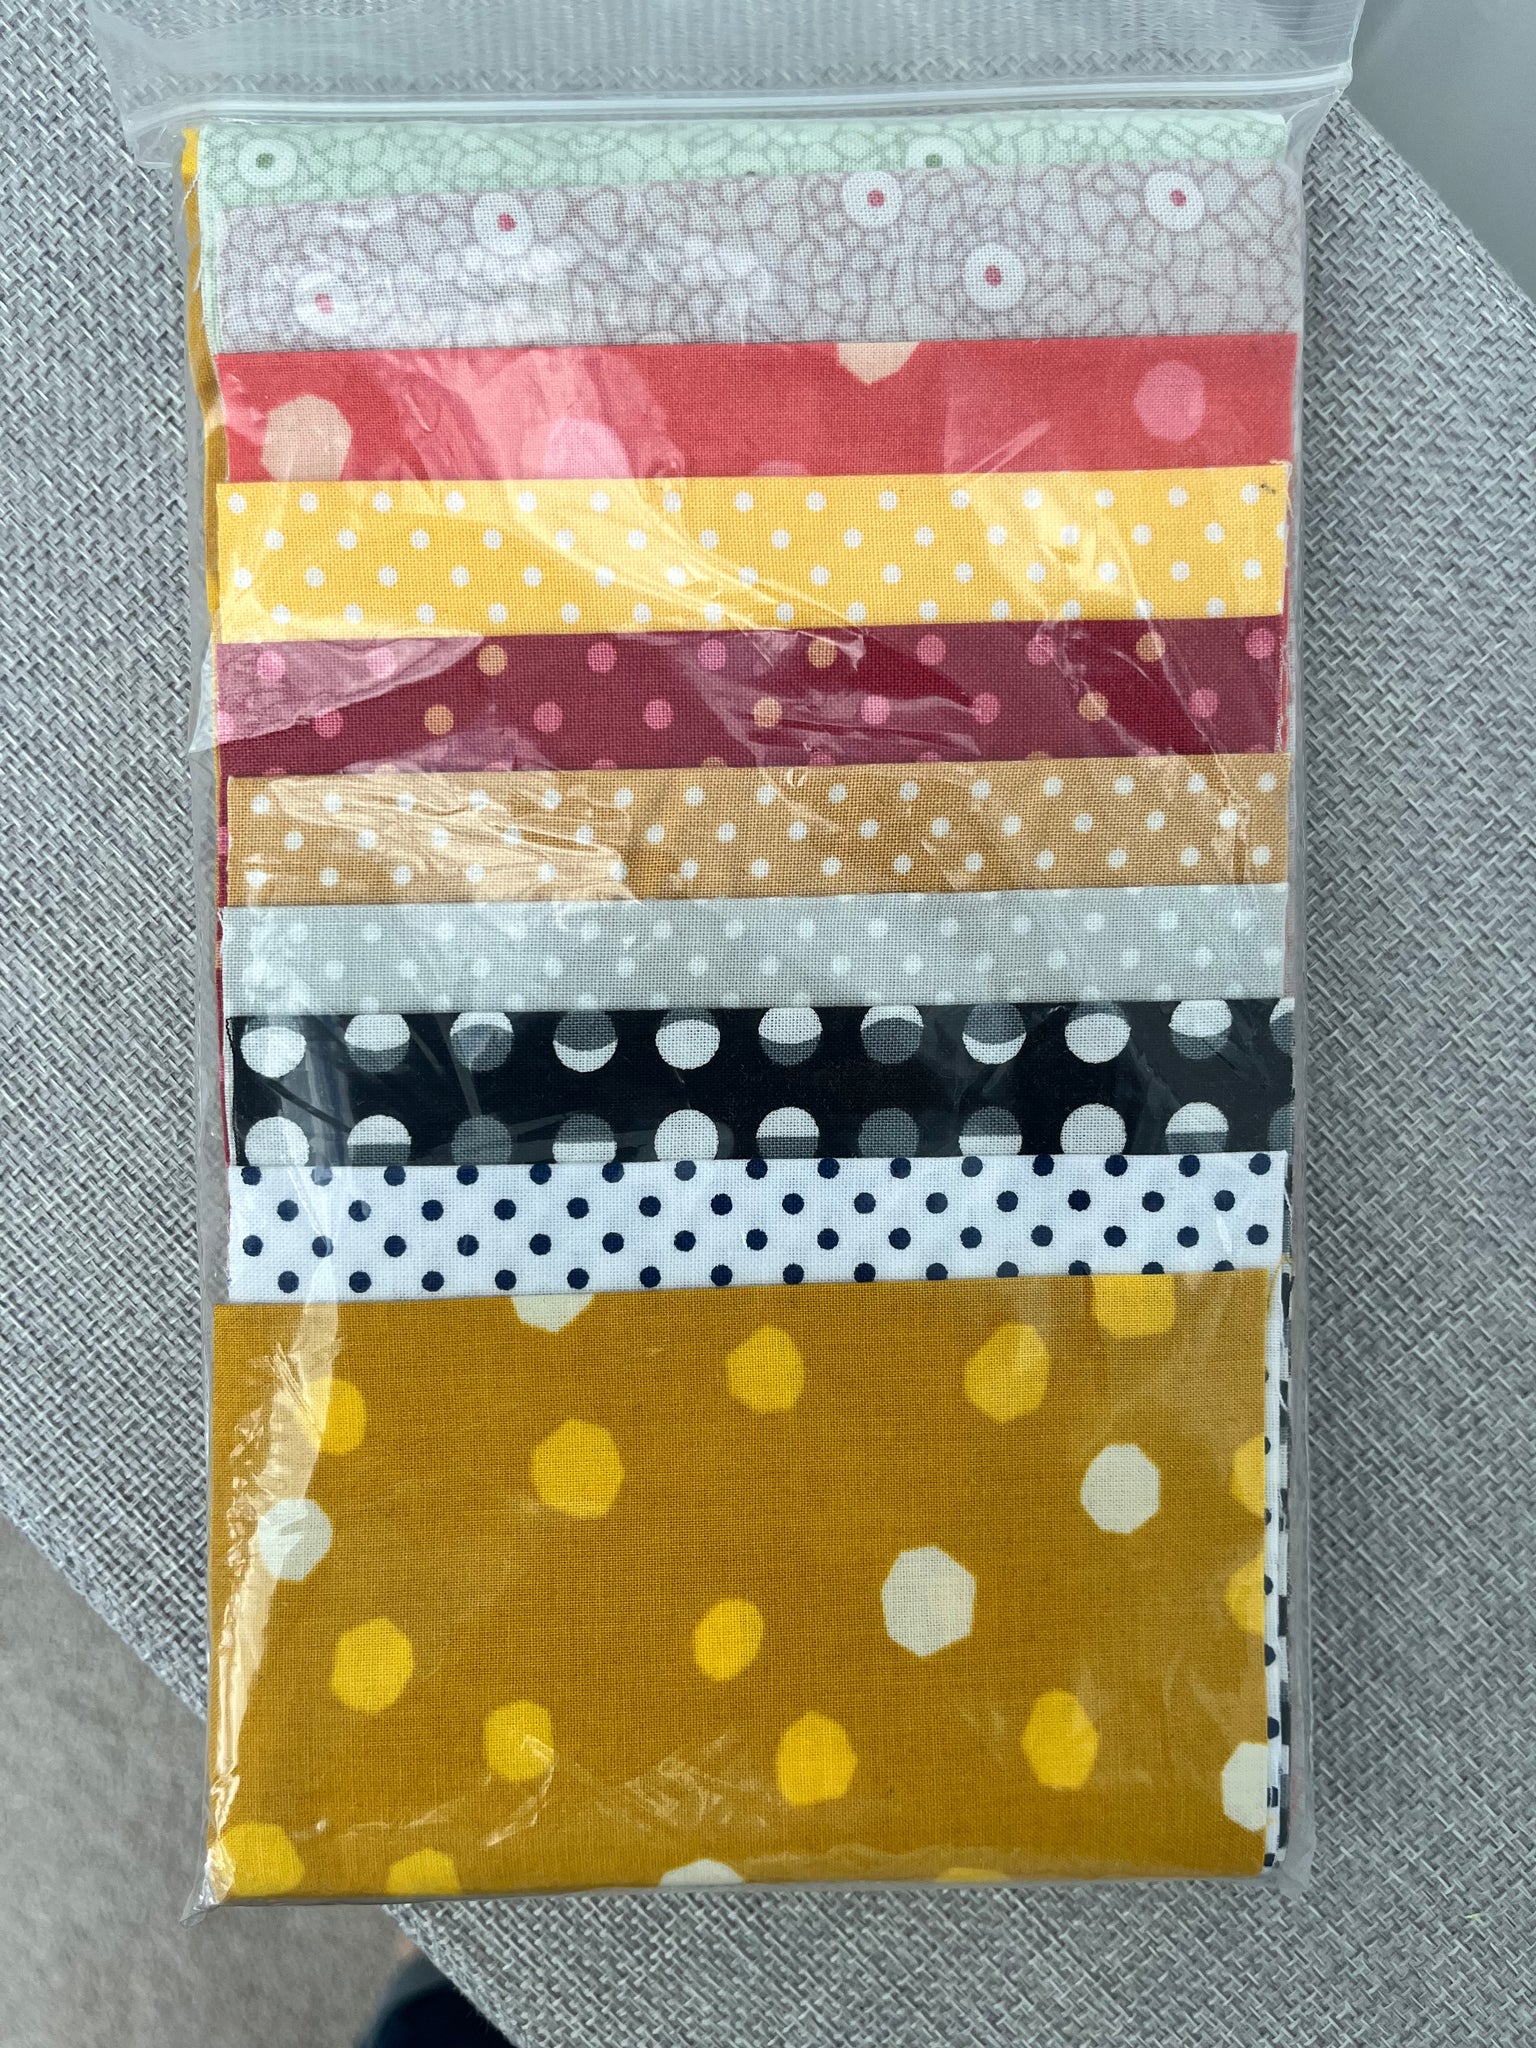 Dots & Spots - 5" strip packs  - 5" x 42" - 10 5" strips - 1 1/4 mtrs of fabric